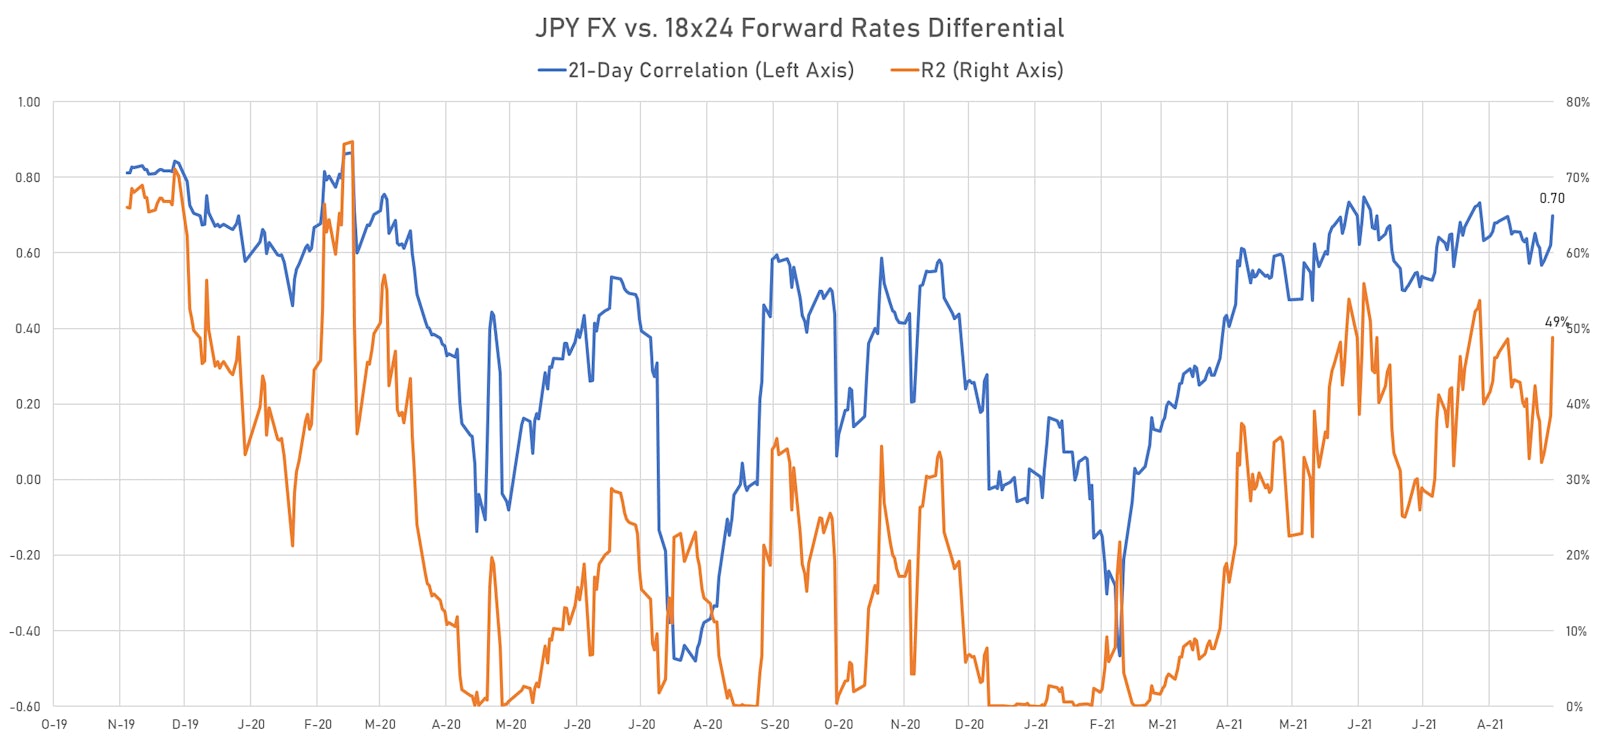 Correlation Between Moves In Short Forward Rates And Spot JPY | Sources: ϕpost, Refinitiv data